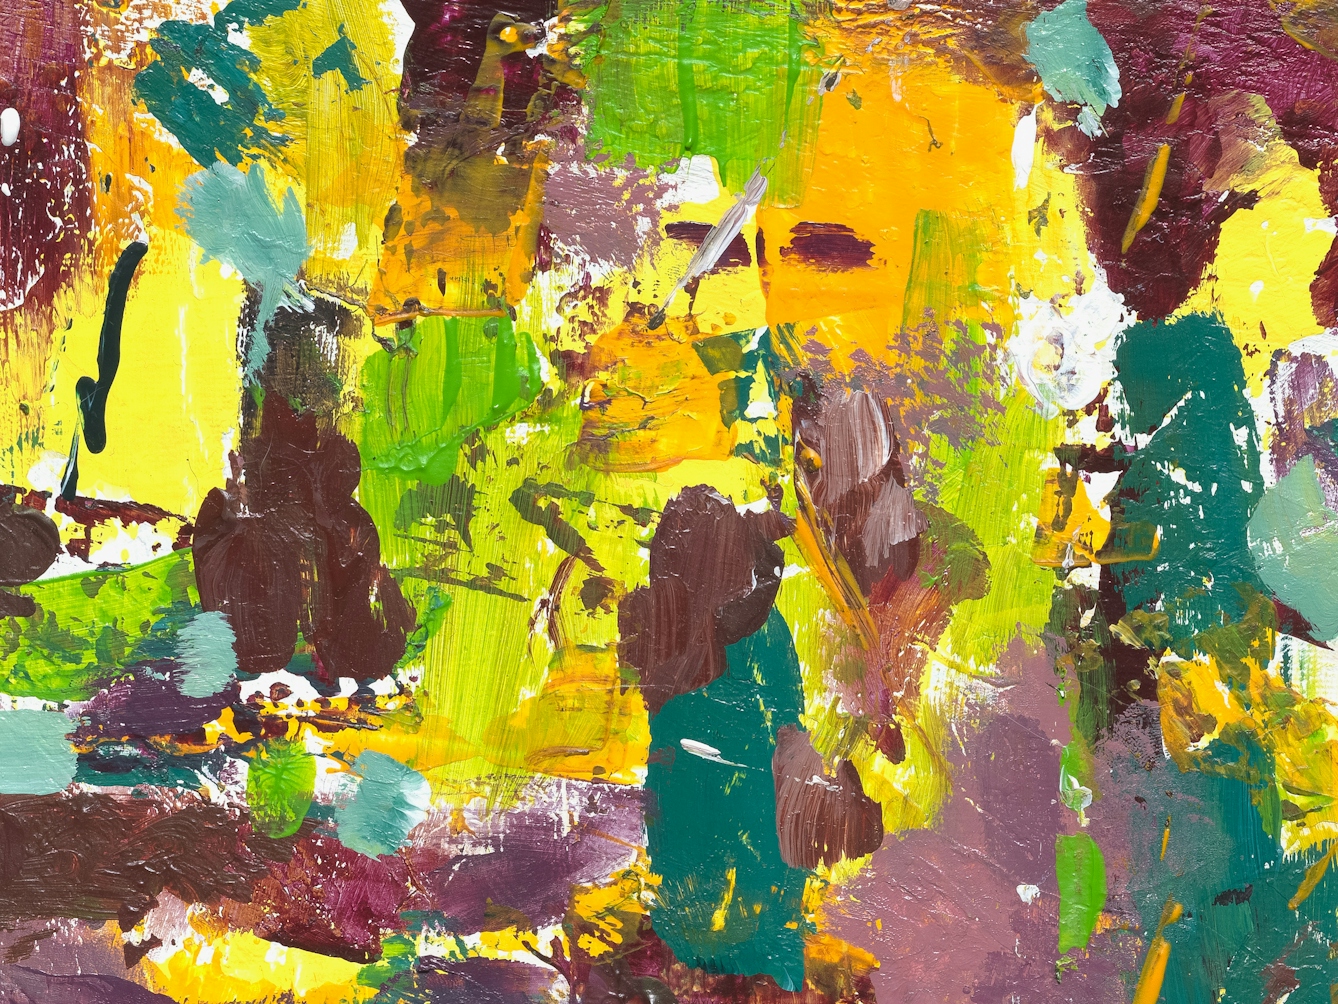 Photograph of close-up detail of a larger abstract expressionist painting  utilising acrylic paint on a rectangular canvas in landscape orientation, titled 'Boundaries'. The artwork explores themes of setting clear boundaries, giving consideration to our privacy, and potential oversharing.

A vast majority of the canvas surface contains harmonious marks and gestures of earthy tones - including yellow, green, teal, burgundy, brown, orange and white. It's akin to a dense, blooming meadow of various plants and flowers. 